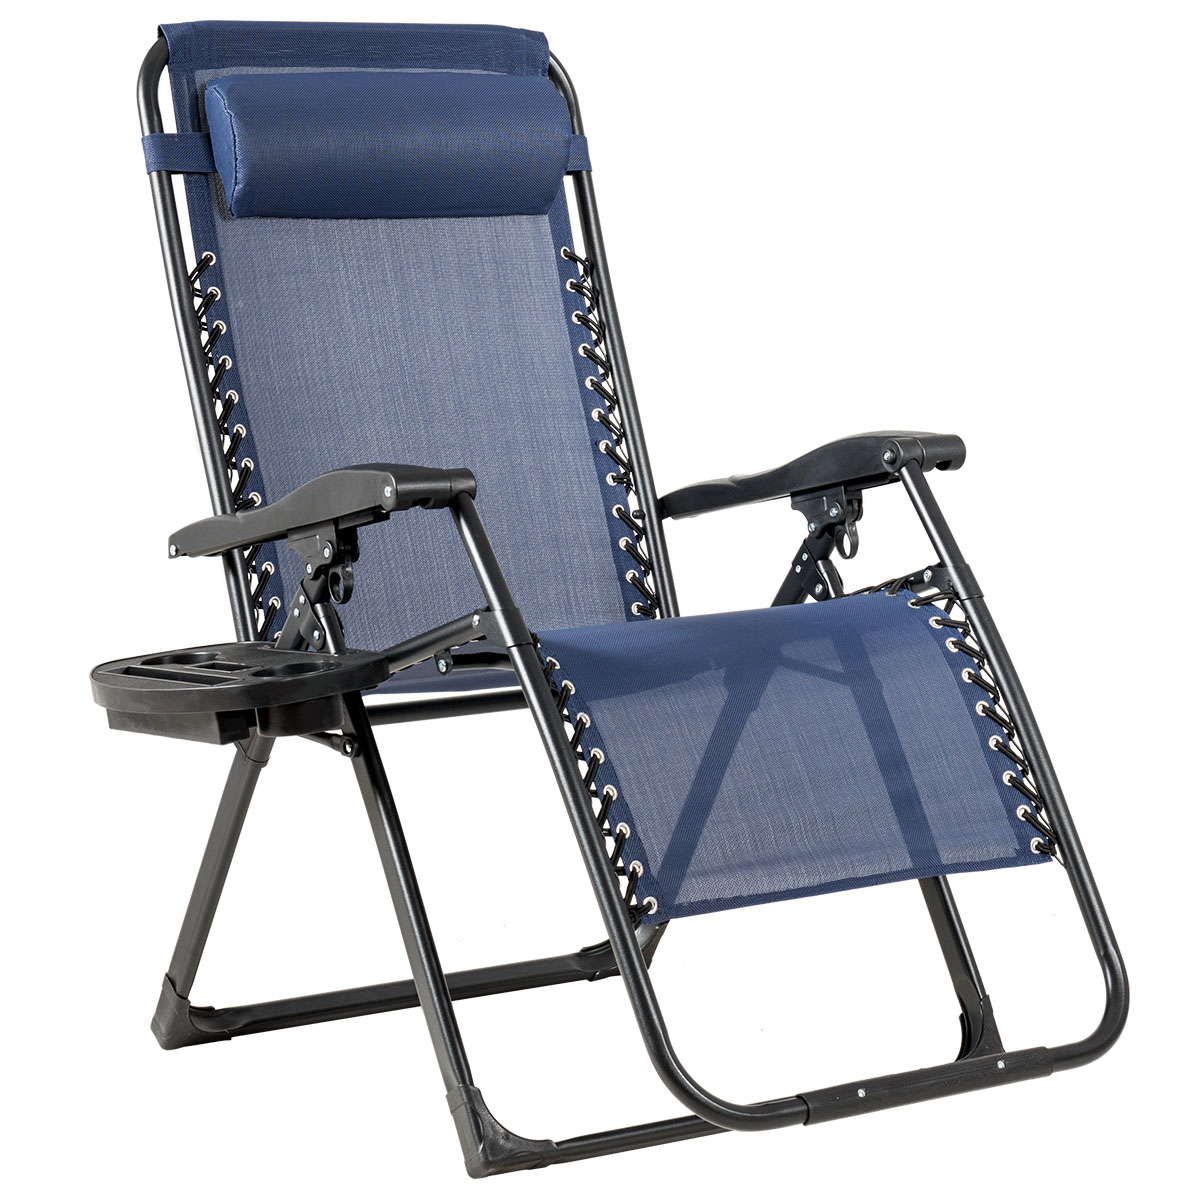 Costway Zero Gravity Chair Oversize Lounge Chair Patio Heavy Duty Folding Recliner Blue - image 1 of 8